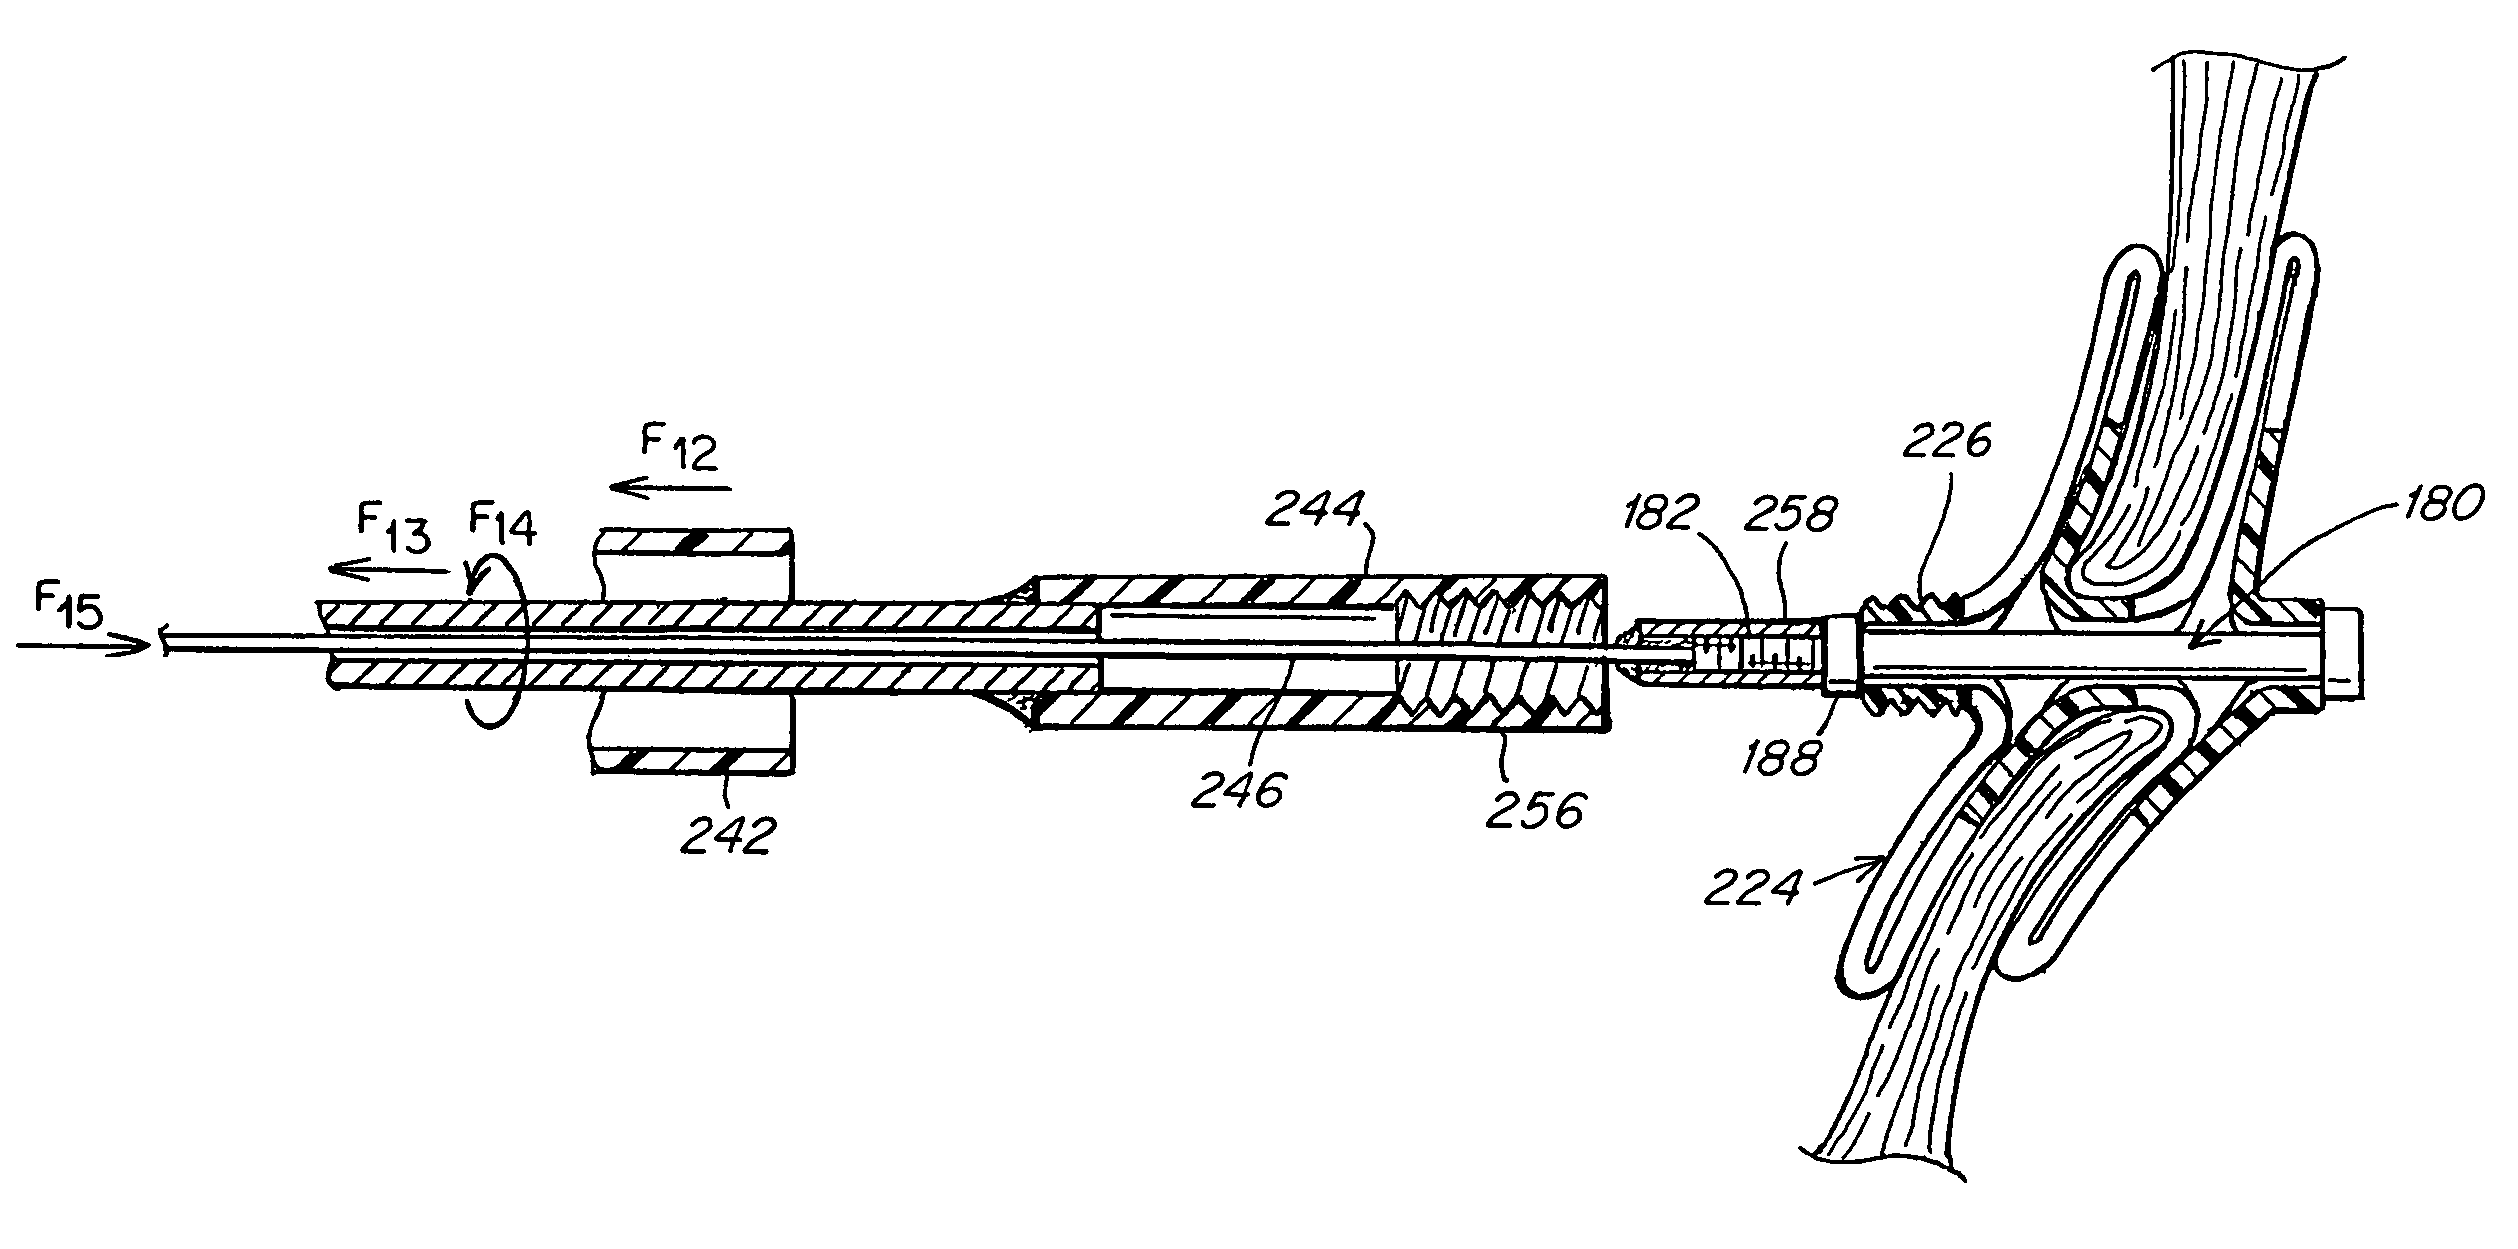 Occluder device double securement system for delivery/recovery of such occluder device